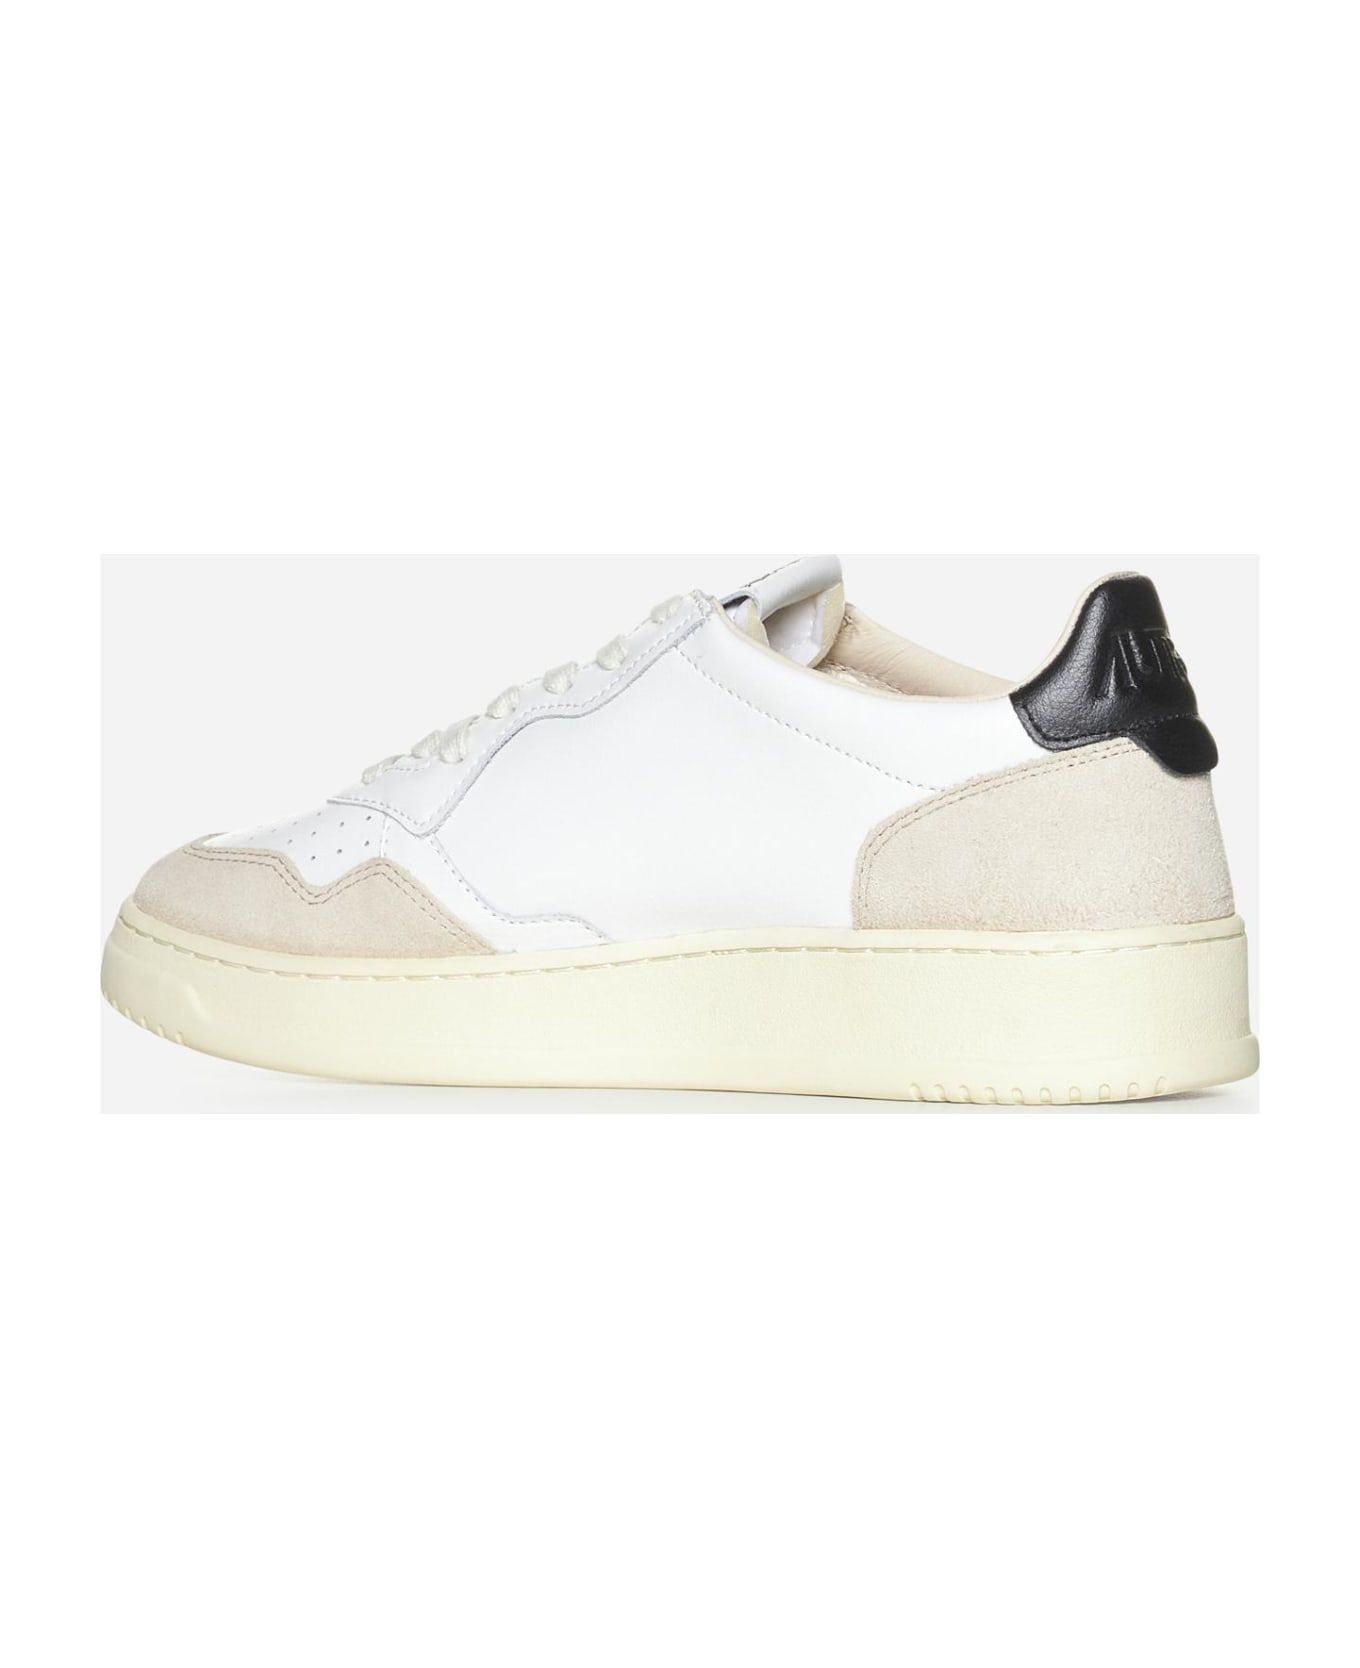 Autry Medalist Leather And Suede Sneakers - Bianco